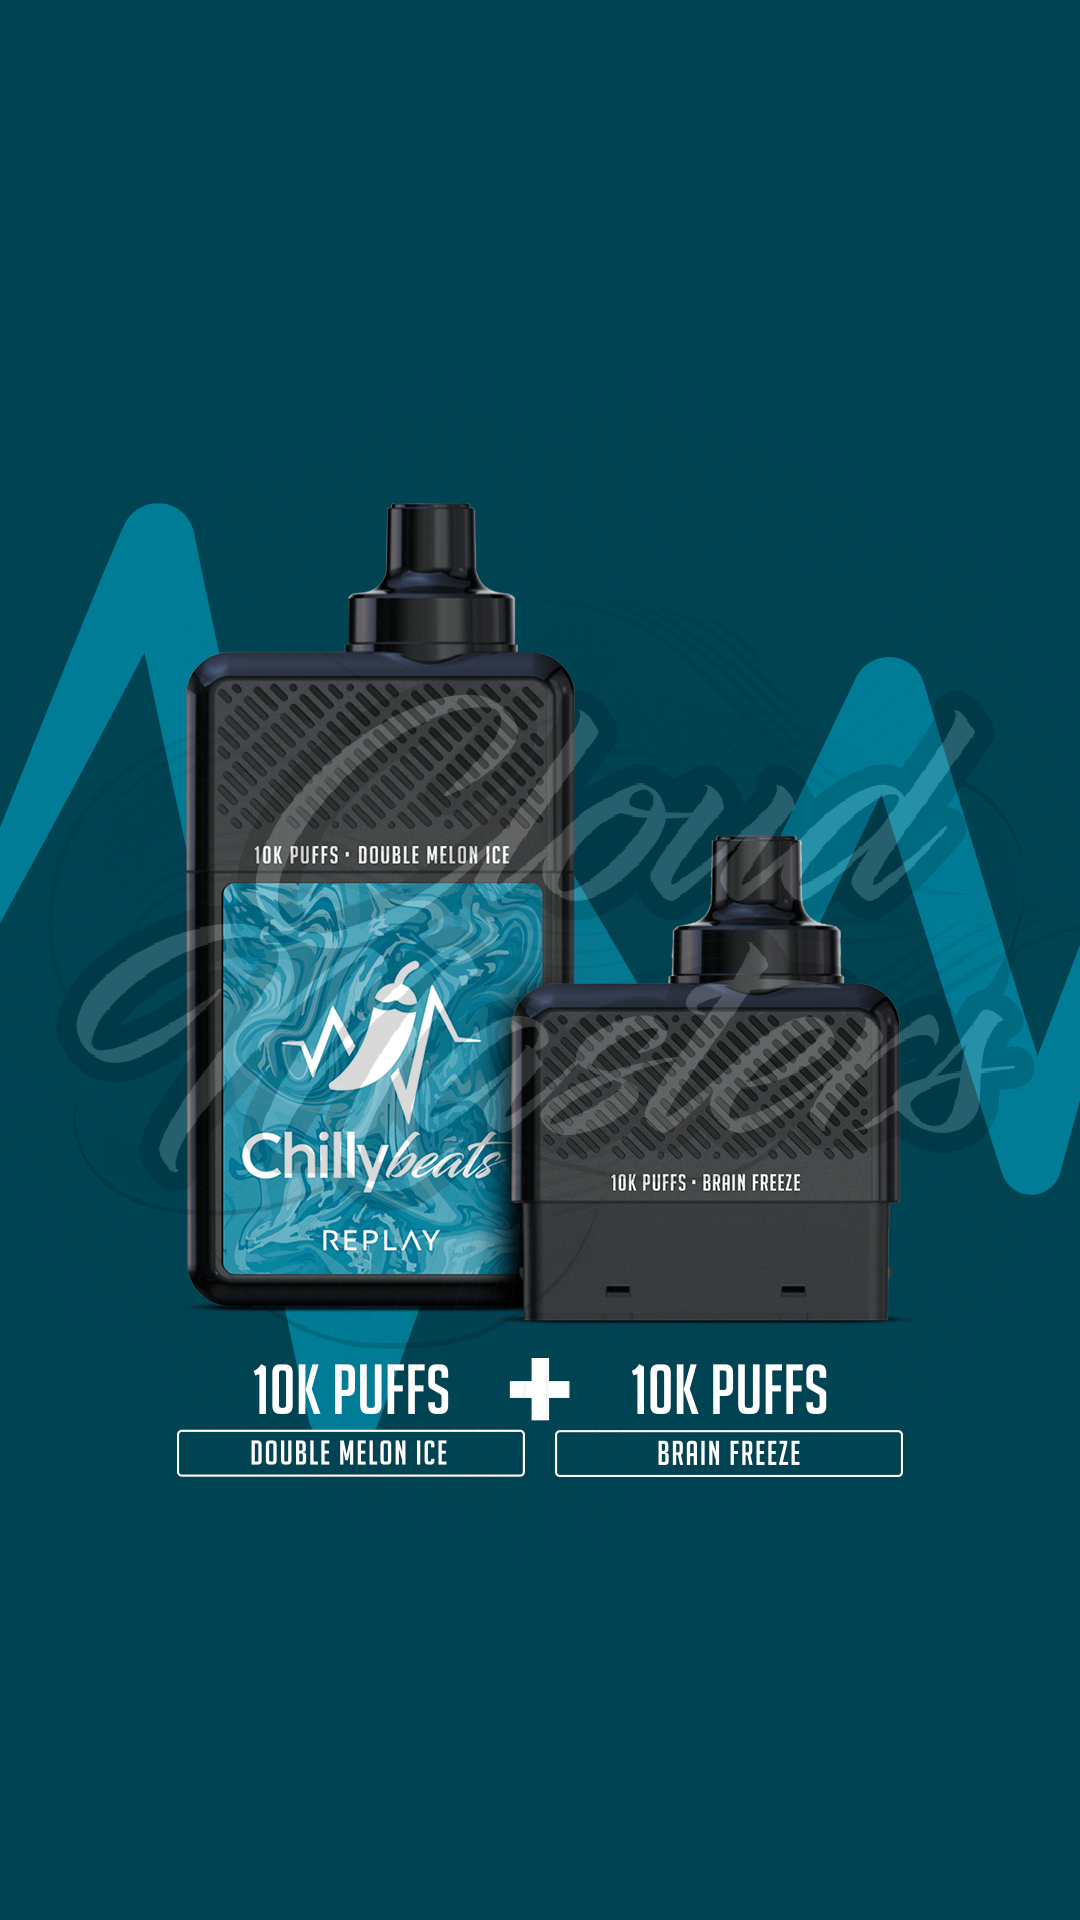 Chilly Beats Replay 20k puffs – Double Melon Ice + Brain Freeze – Vertical